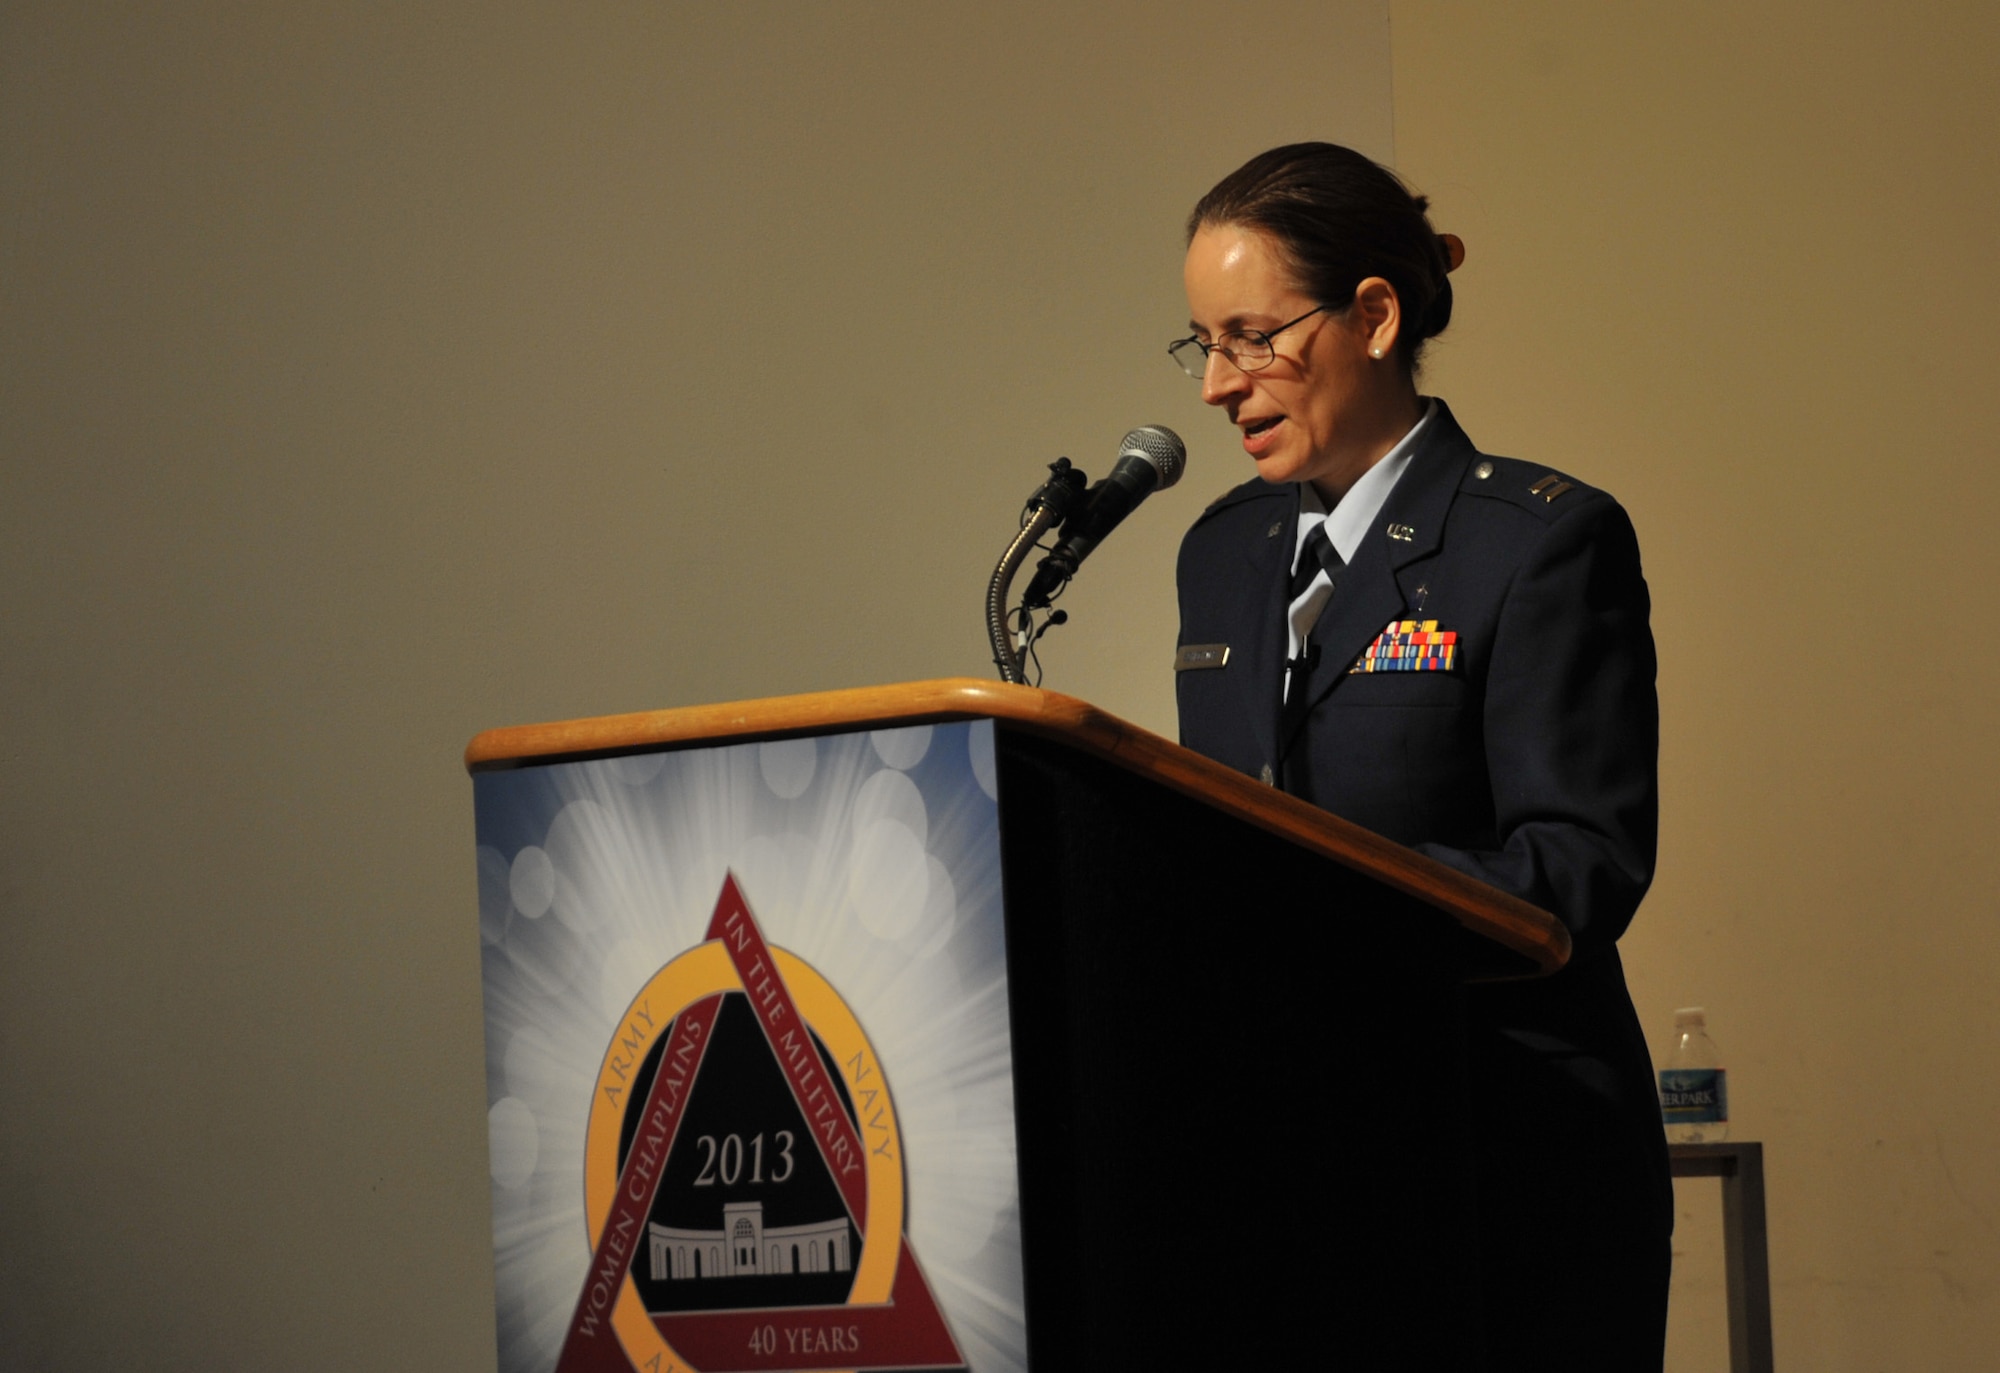 Chaplain (Capt.) Sarah Schechter of the 11th Wing at Joint Base Andrews performs master of ceremonies duty for the  new exhibit featuring women chaplains at the Women in Military Service for America Memorial at Arlington, Va., March 4, 2013.  Schechter is the Air Force’s first and only woman rabbi. (U.S. Air Force photo/Airman 1st Class Alexander W. Riedel)